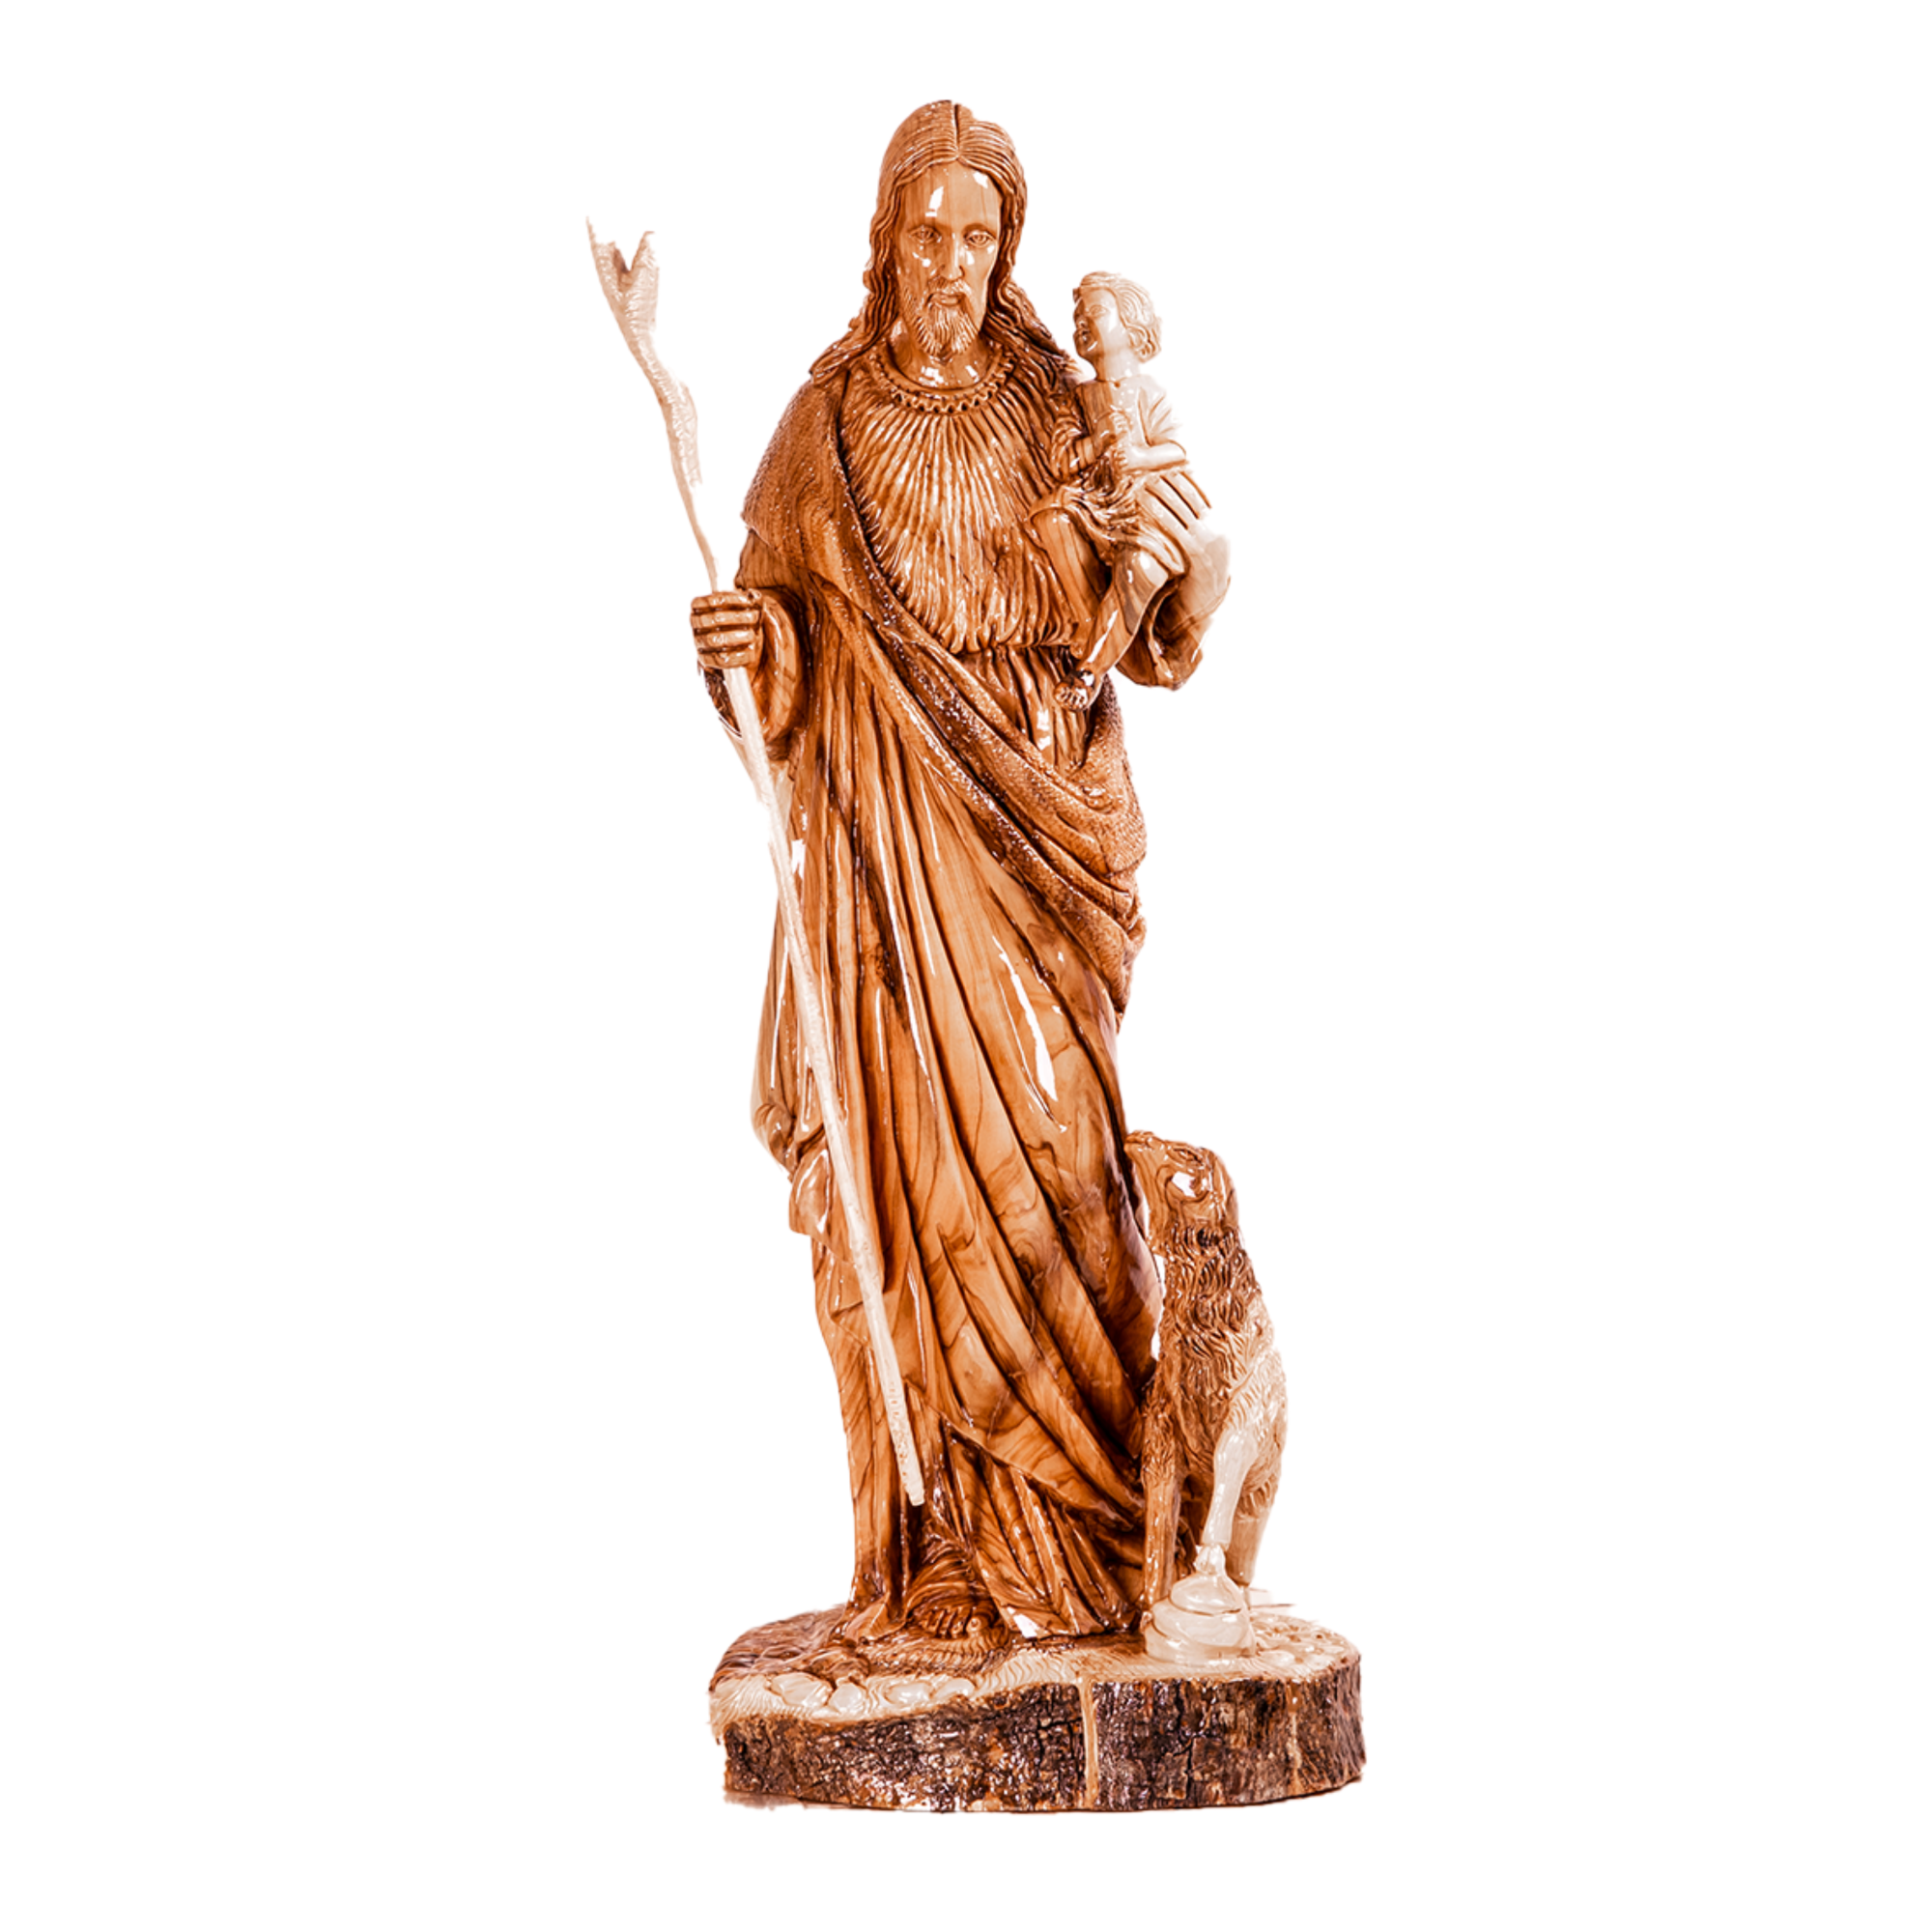 The Good Shepherd, Cathedral Quality, Single piece of Wood. Size: 9.5" x 7.5" x 25"